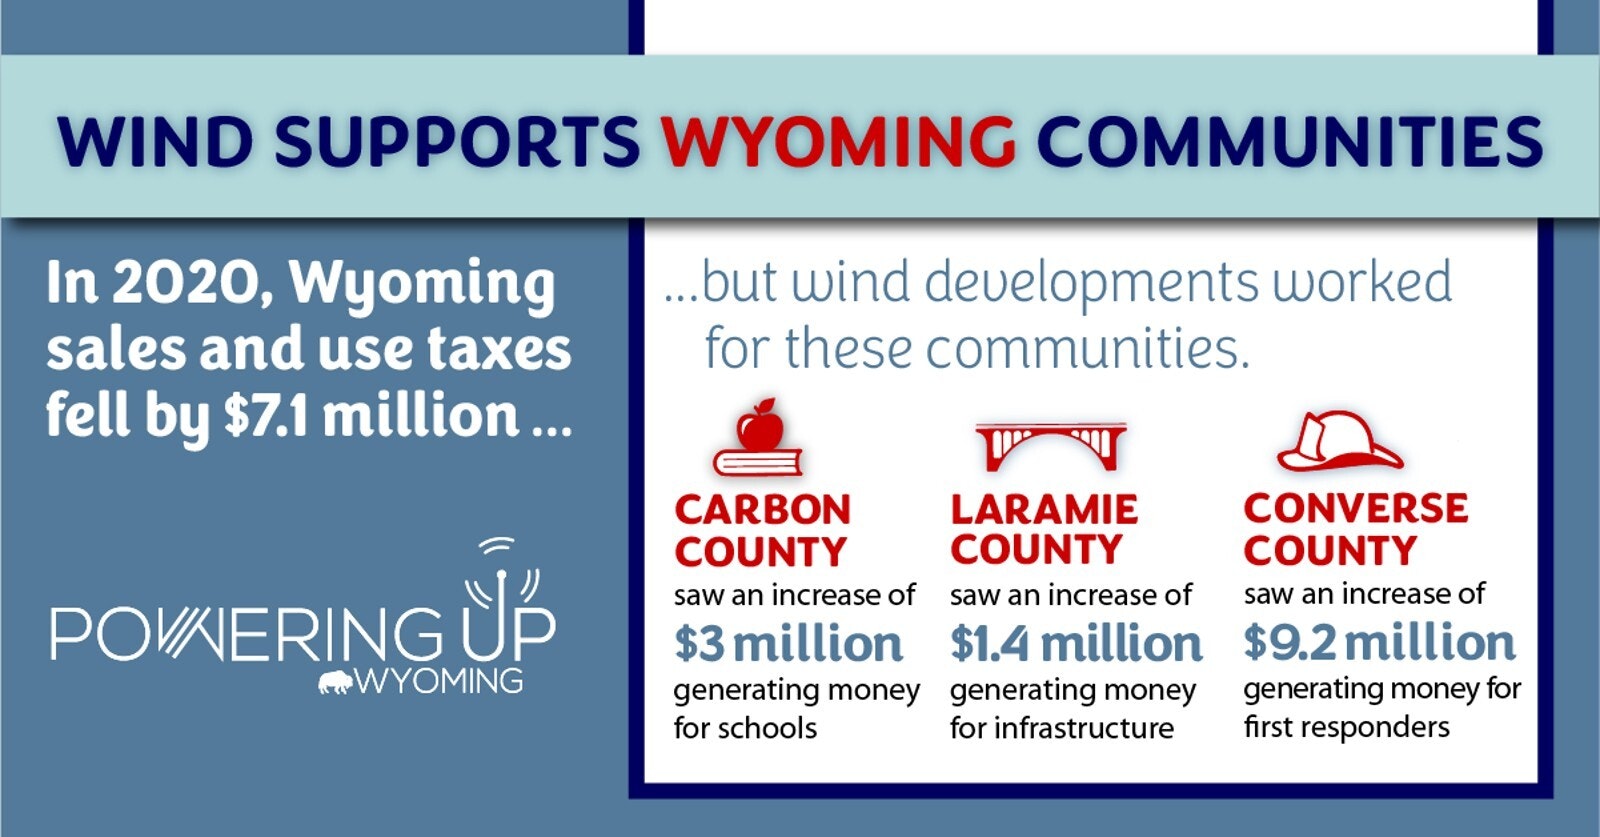 Wind Supports WY Communities image